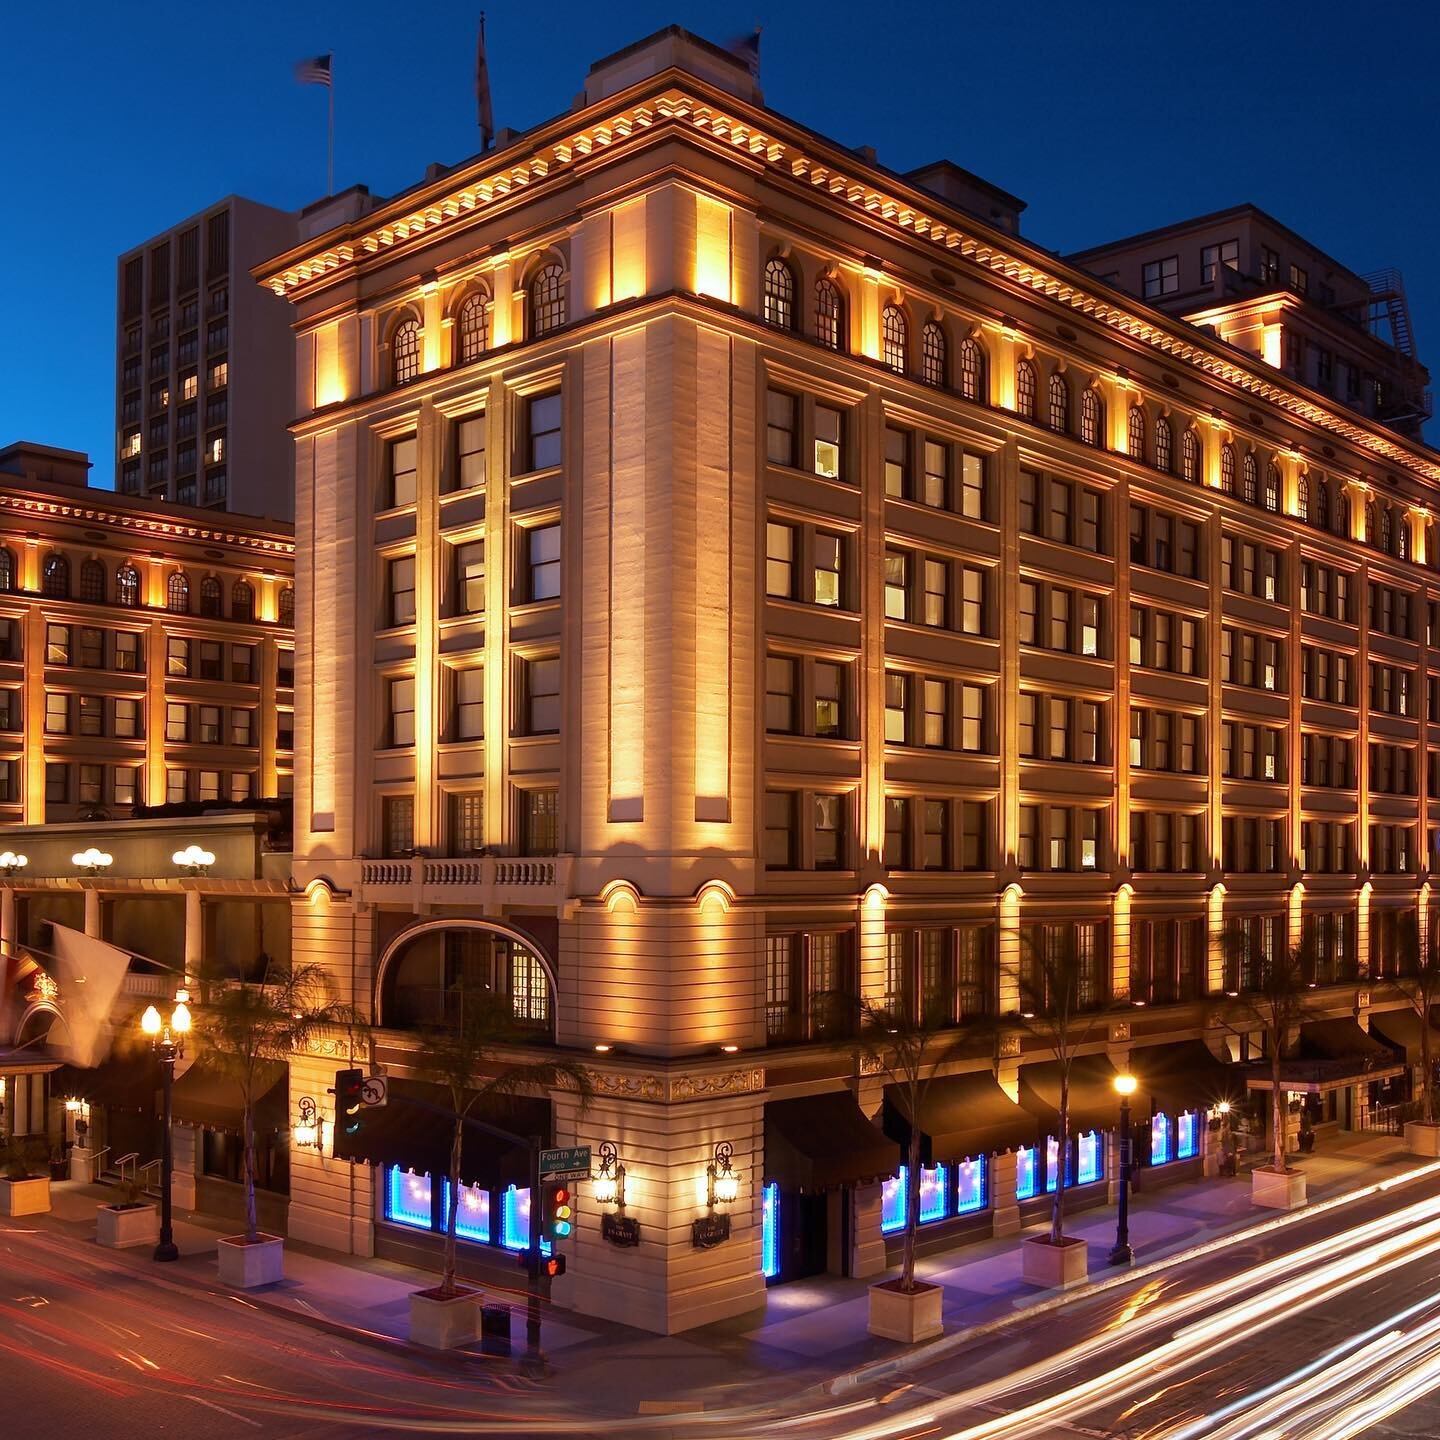 The US Grant Hotel, a celebrated San Diego icon, originally opened in 1910 and went through a major multi-million dollar renovation in 2005. 

Under the guidance of interior designer Frederic Marq, MRD was brought on to provide complete lighting solu